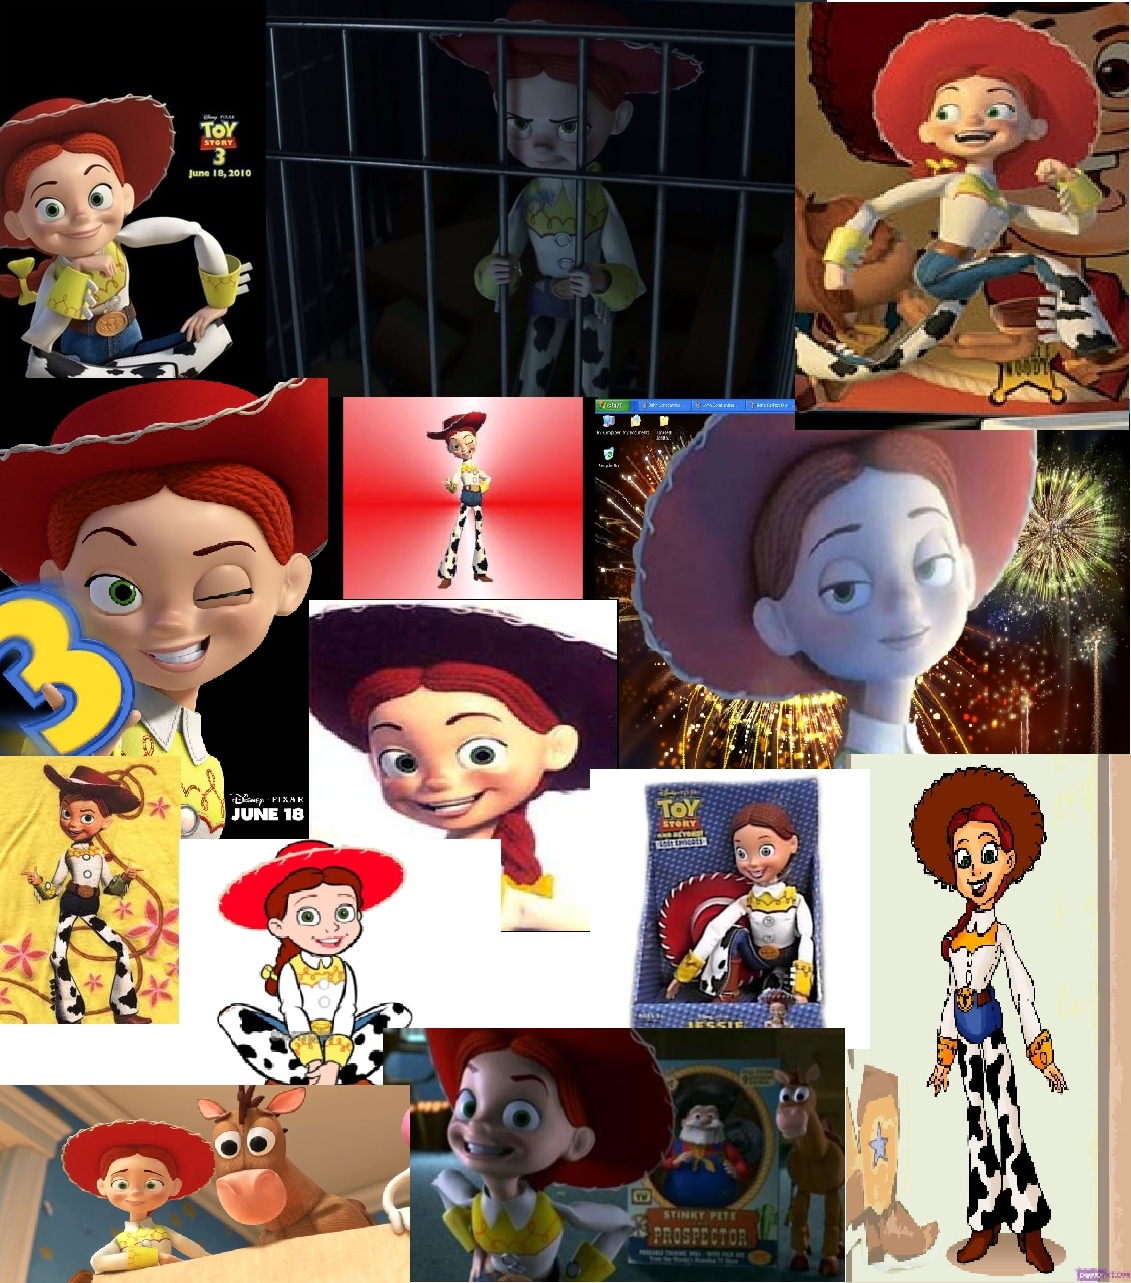 Jessie (Toy Story) Images on Fanpop.